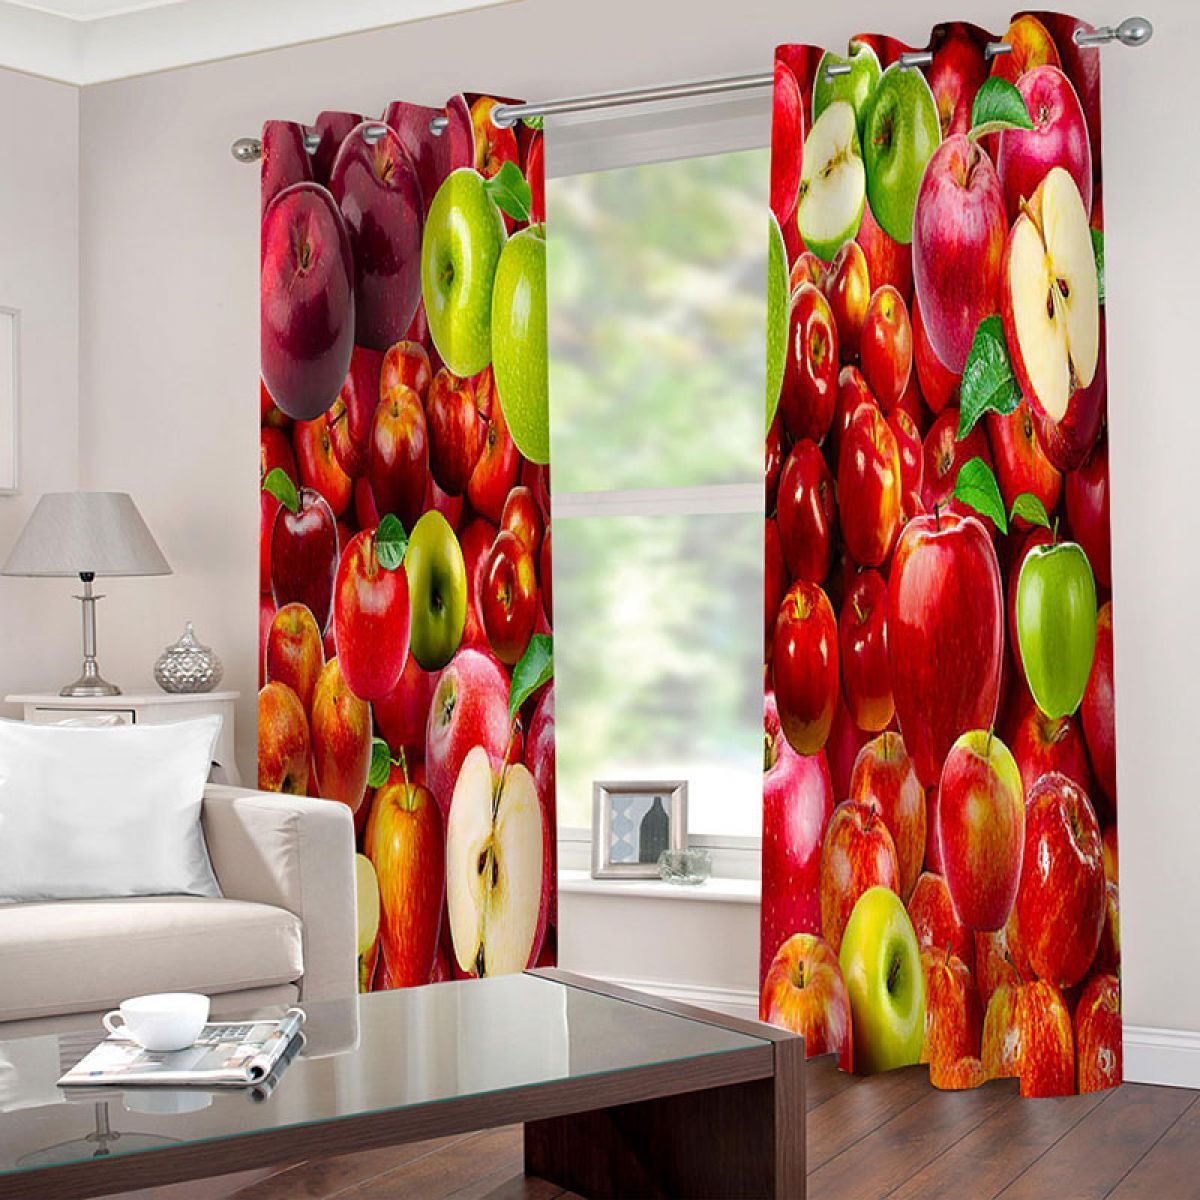 red and green apple fruits printed window curtain home decor 1772